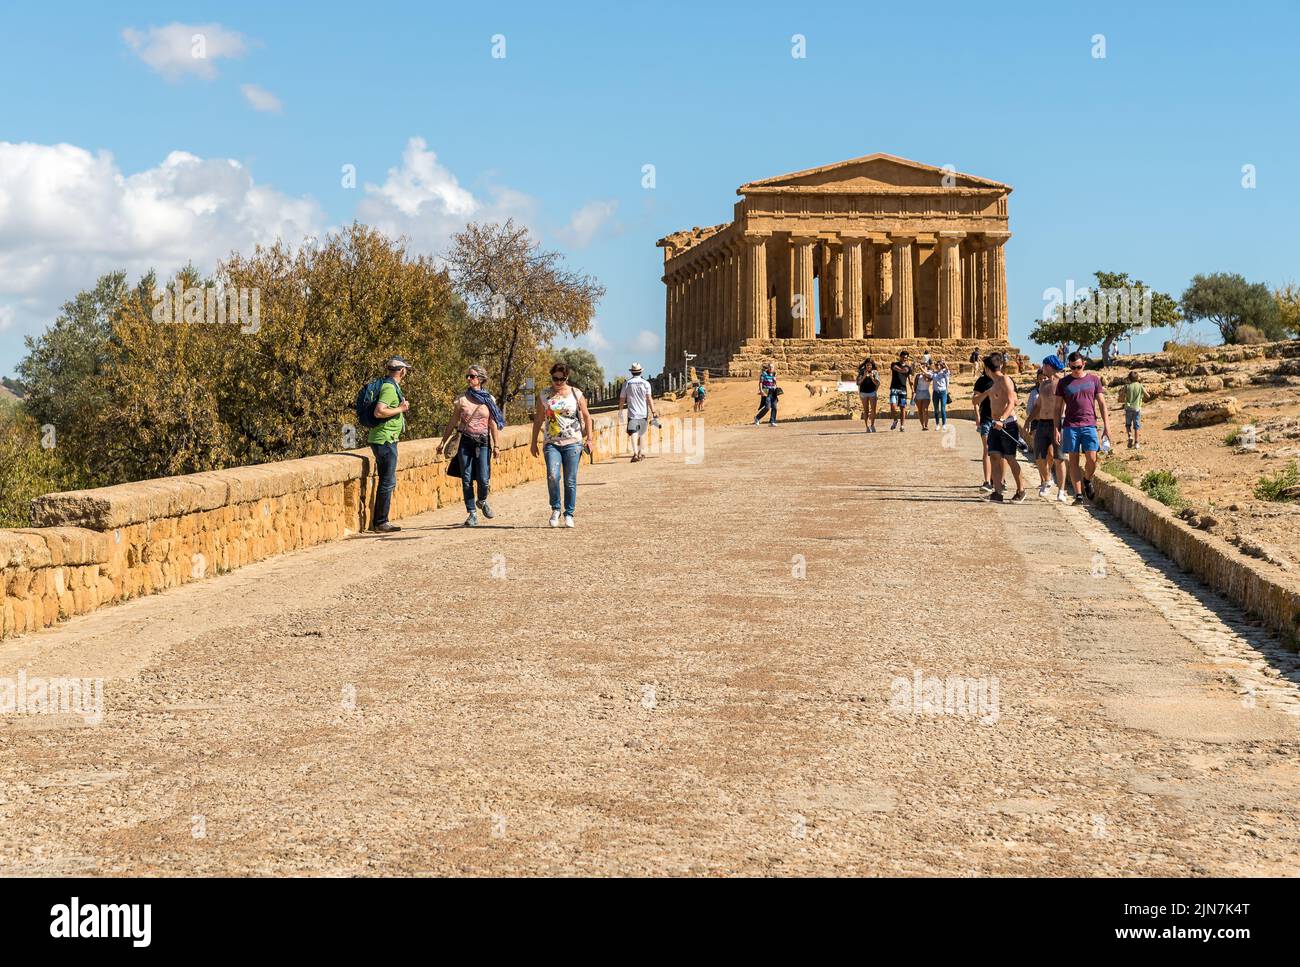 Agrigento, Sicily, Italy - October 9, 2017: Tourists visiting the Valley of the Temples in Agrigento. Stock Photo